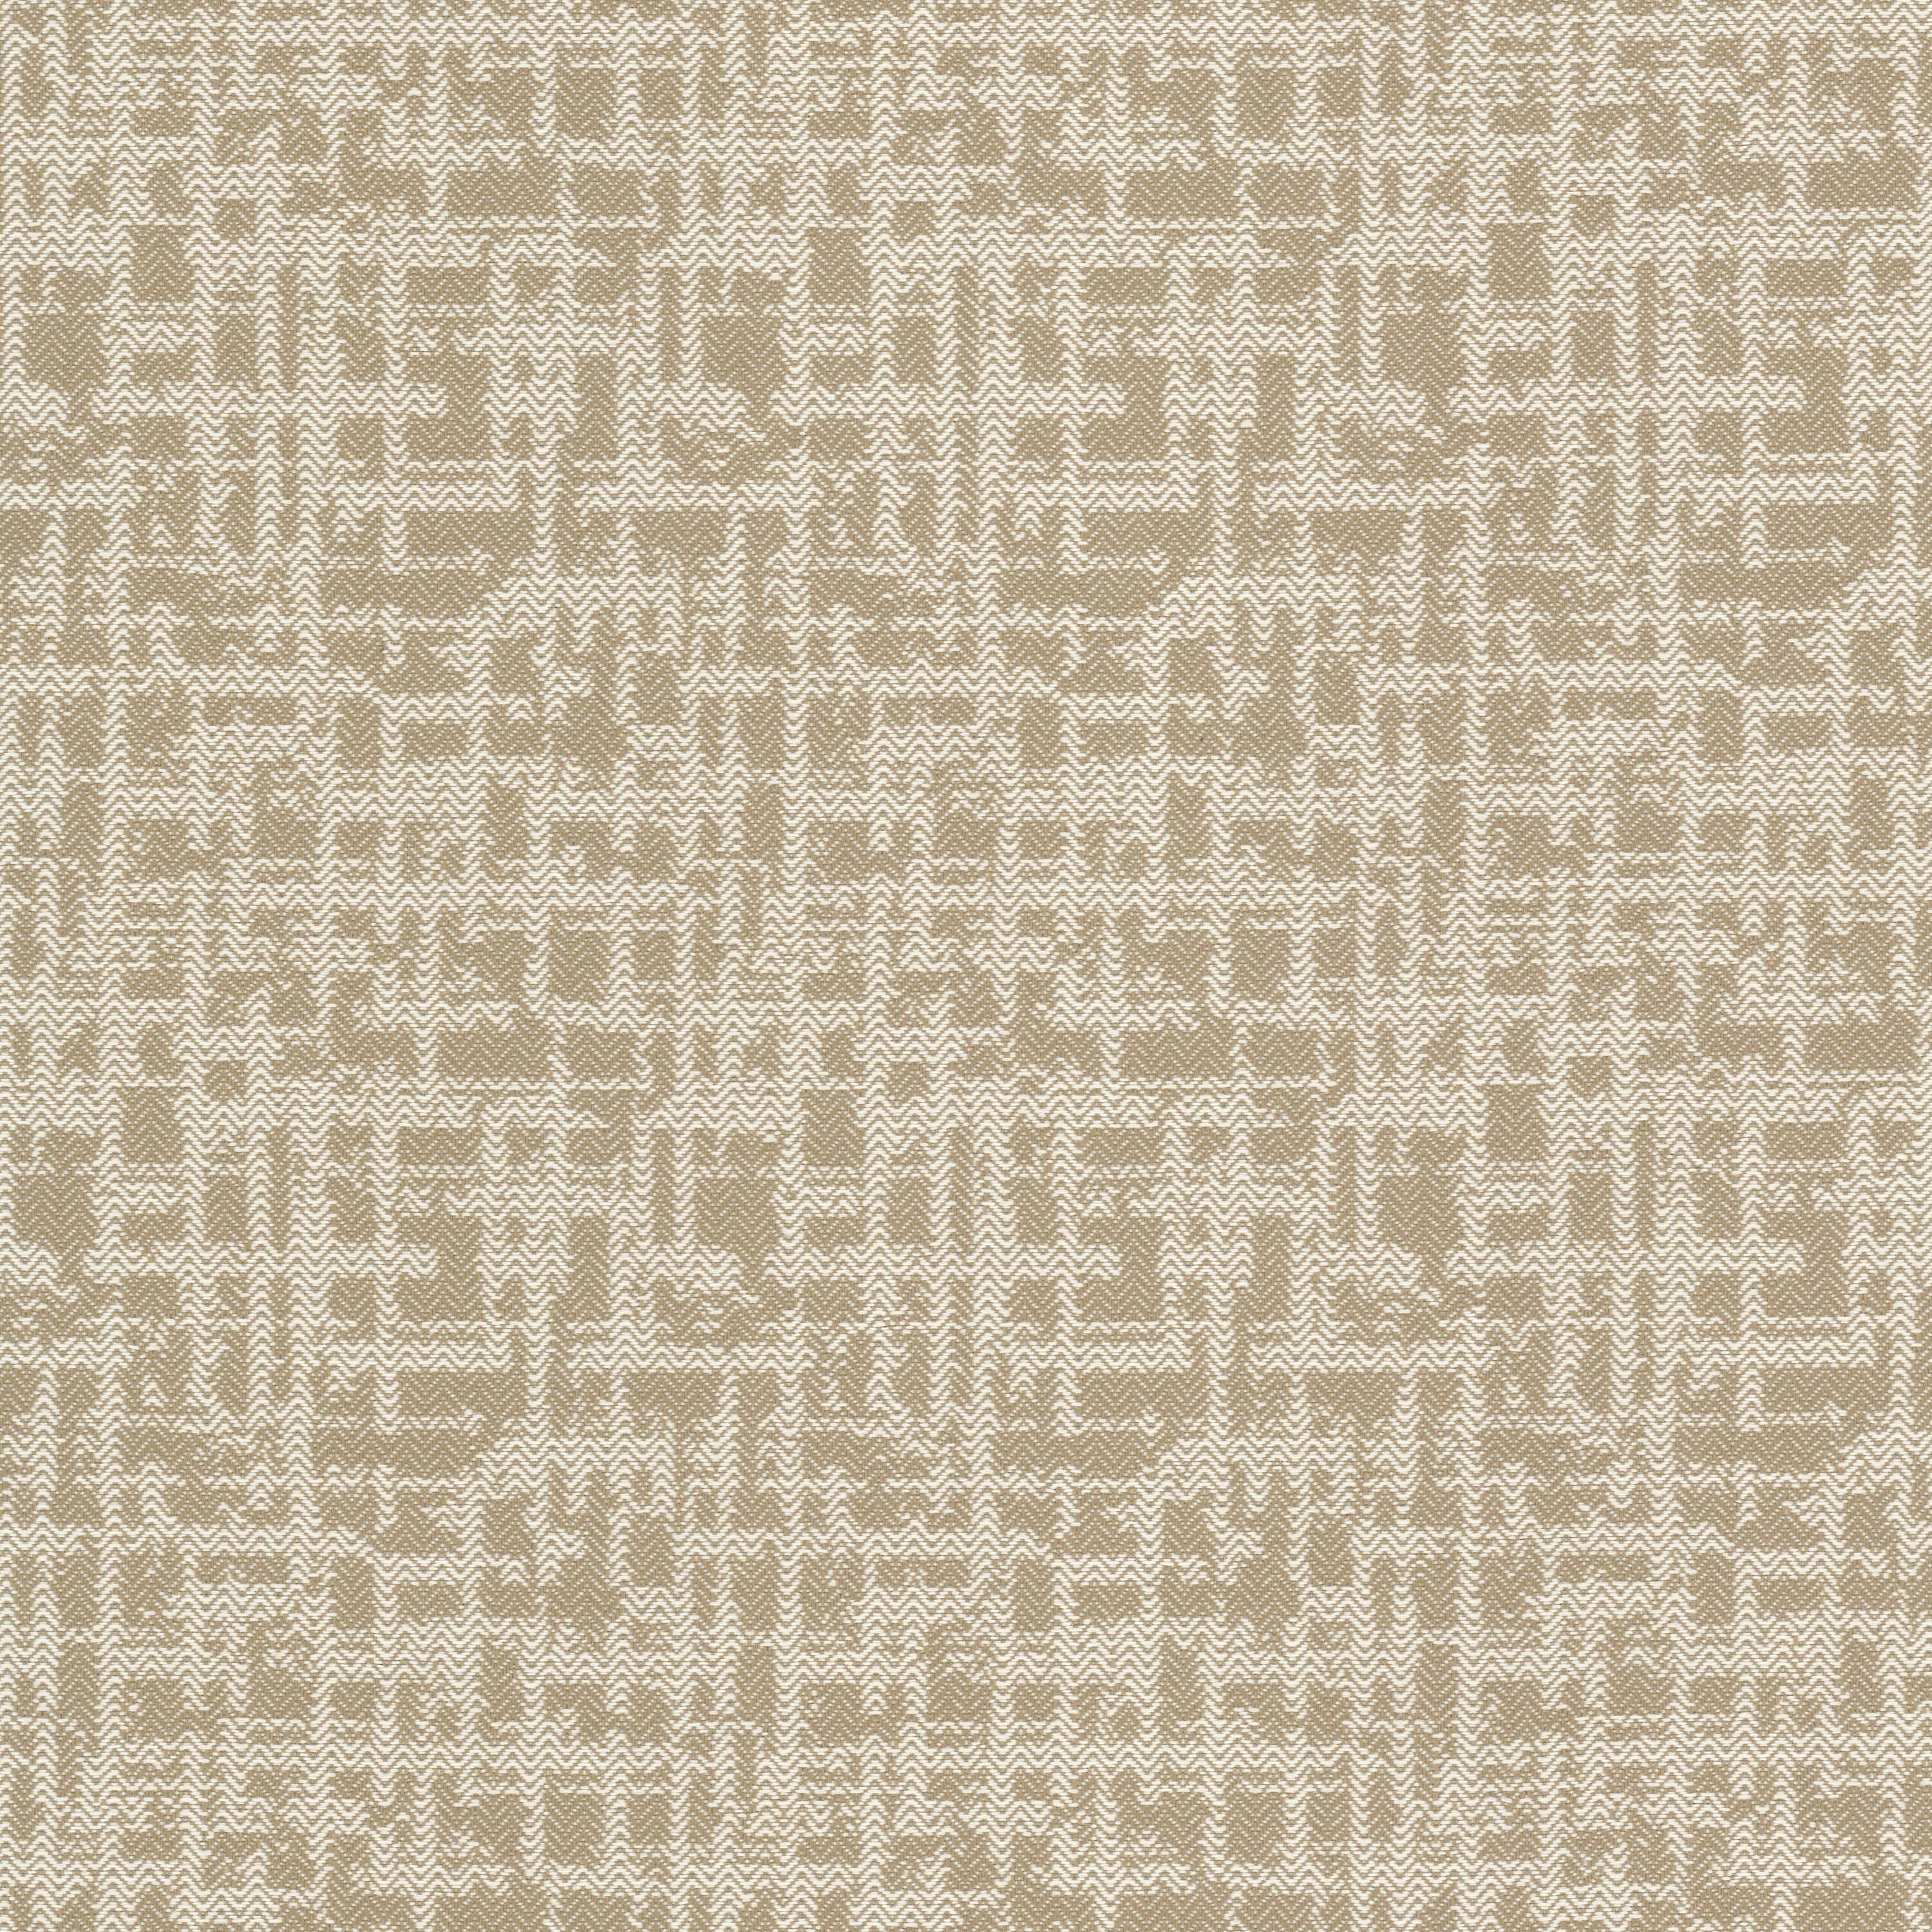 Papalle 1 Beige by Stout Fabric